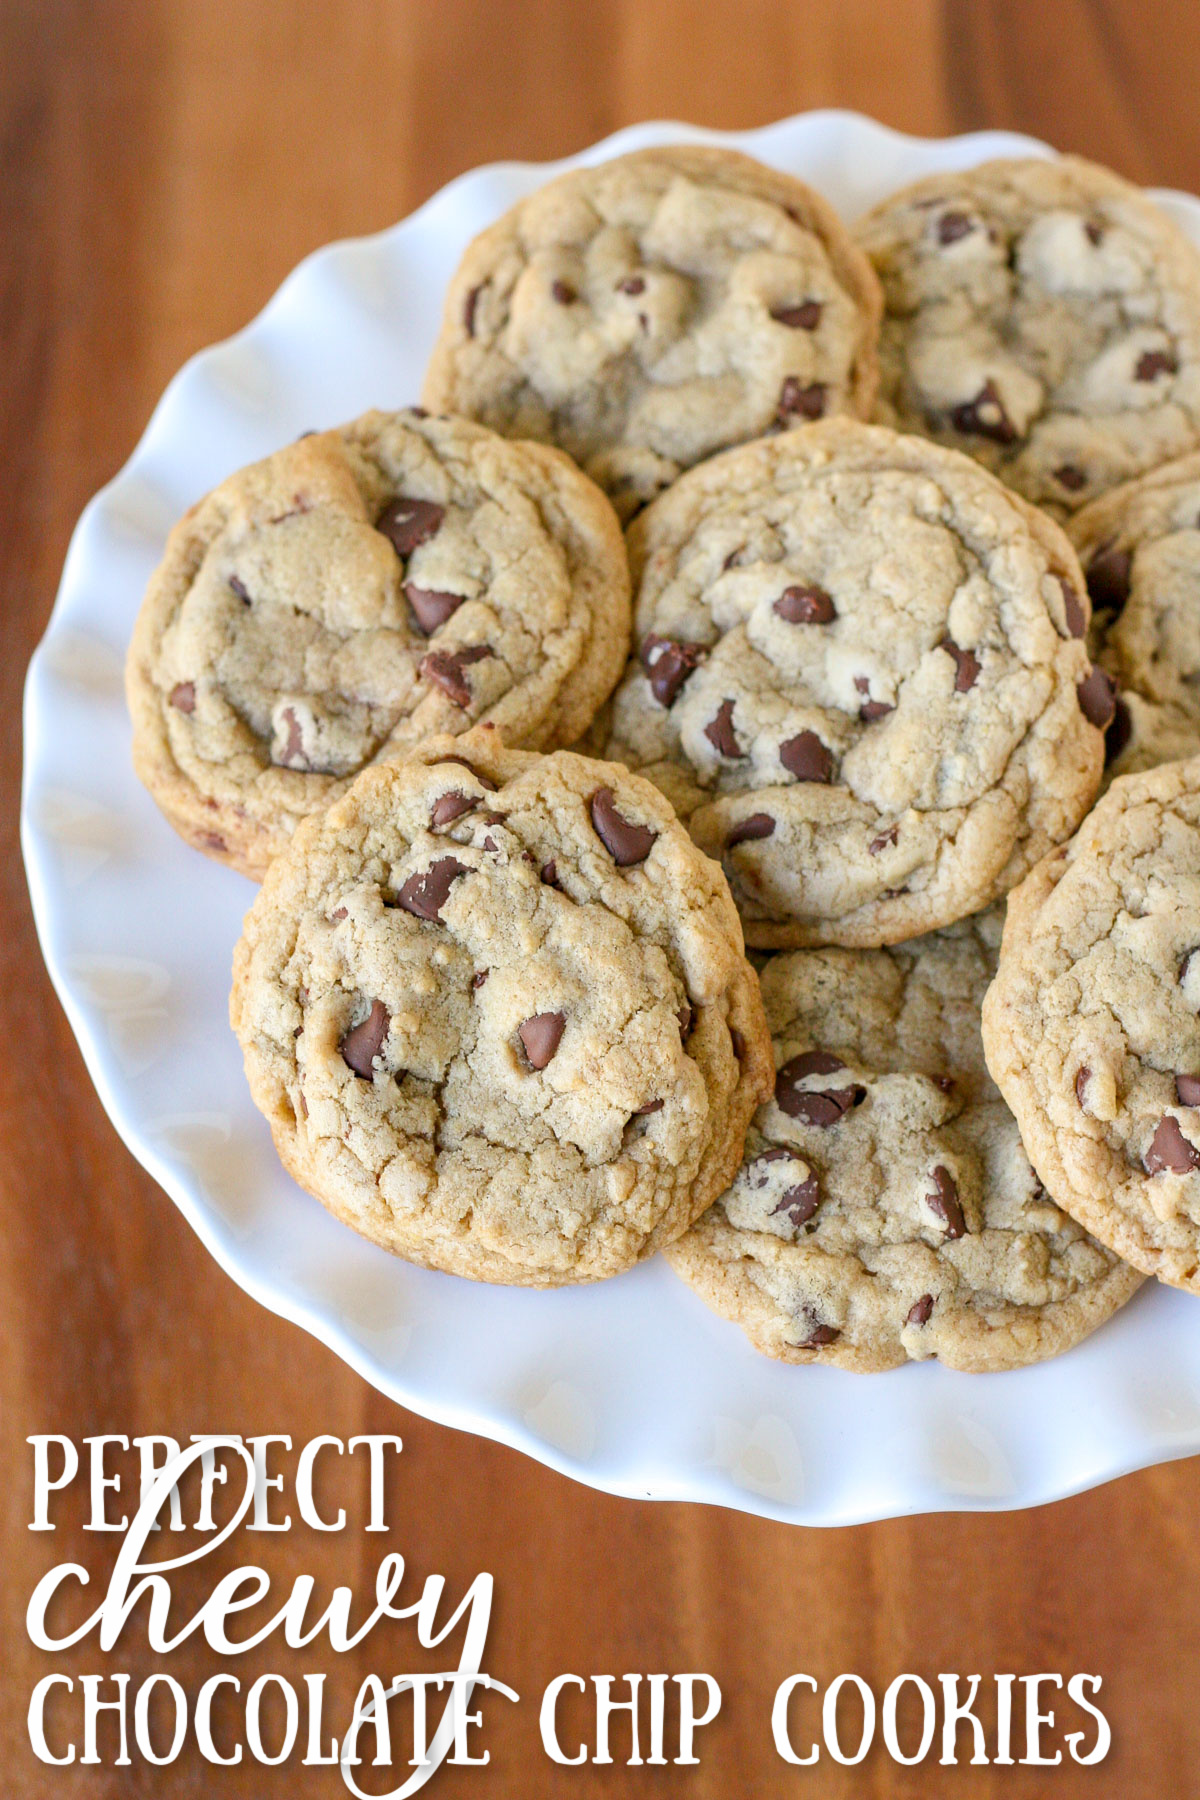 https://www.glorioustreats.com/wp-content/uploads/2013/09/chocolate-chip-cookies-piled-on-white-cake-stand-with-wood-surface-underneath-and-text-overlay-at-the-bottom.jpg